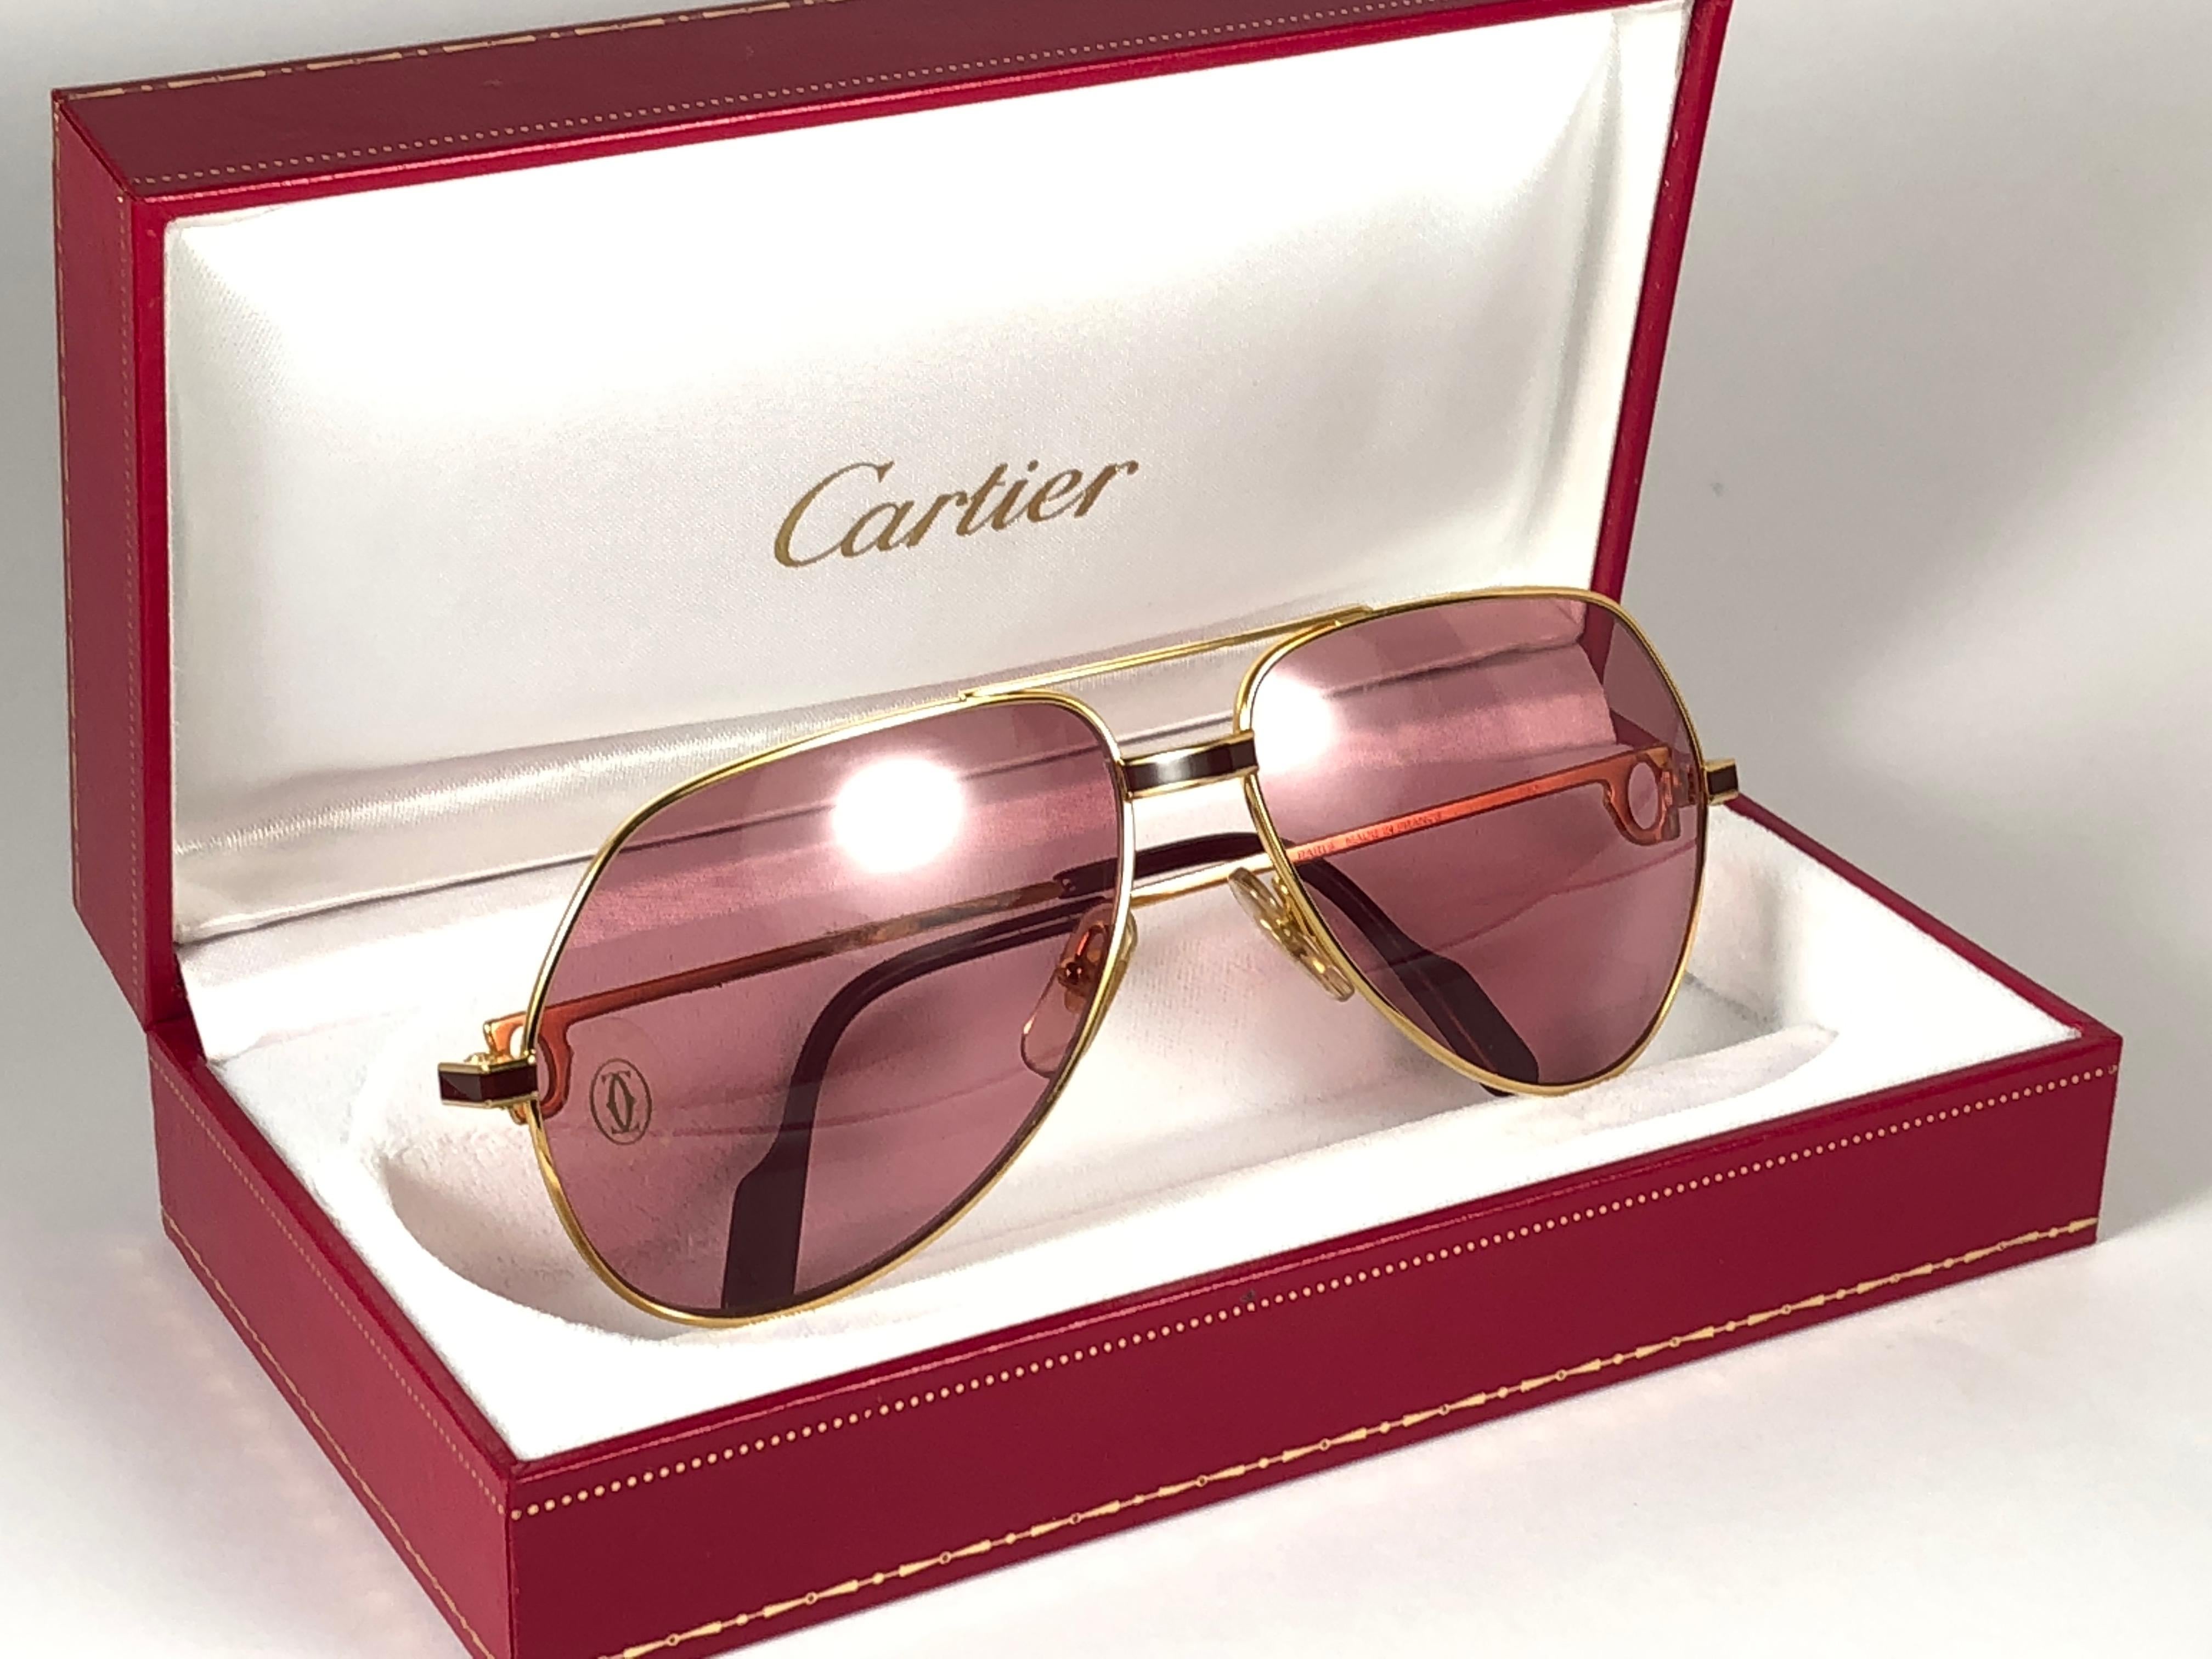 New from 1983!!! Cartier Aviator Laque de Chine Heavy plated gold sunglasses with original Cartier rose (uv protection) Lenses.
All hallmarks. 
Red enamel with Cartier gold signs on the ear paddles. 
Both arms sport the C from Cartier on the